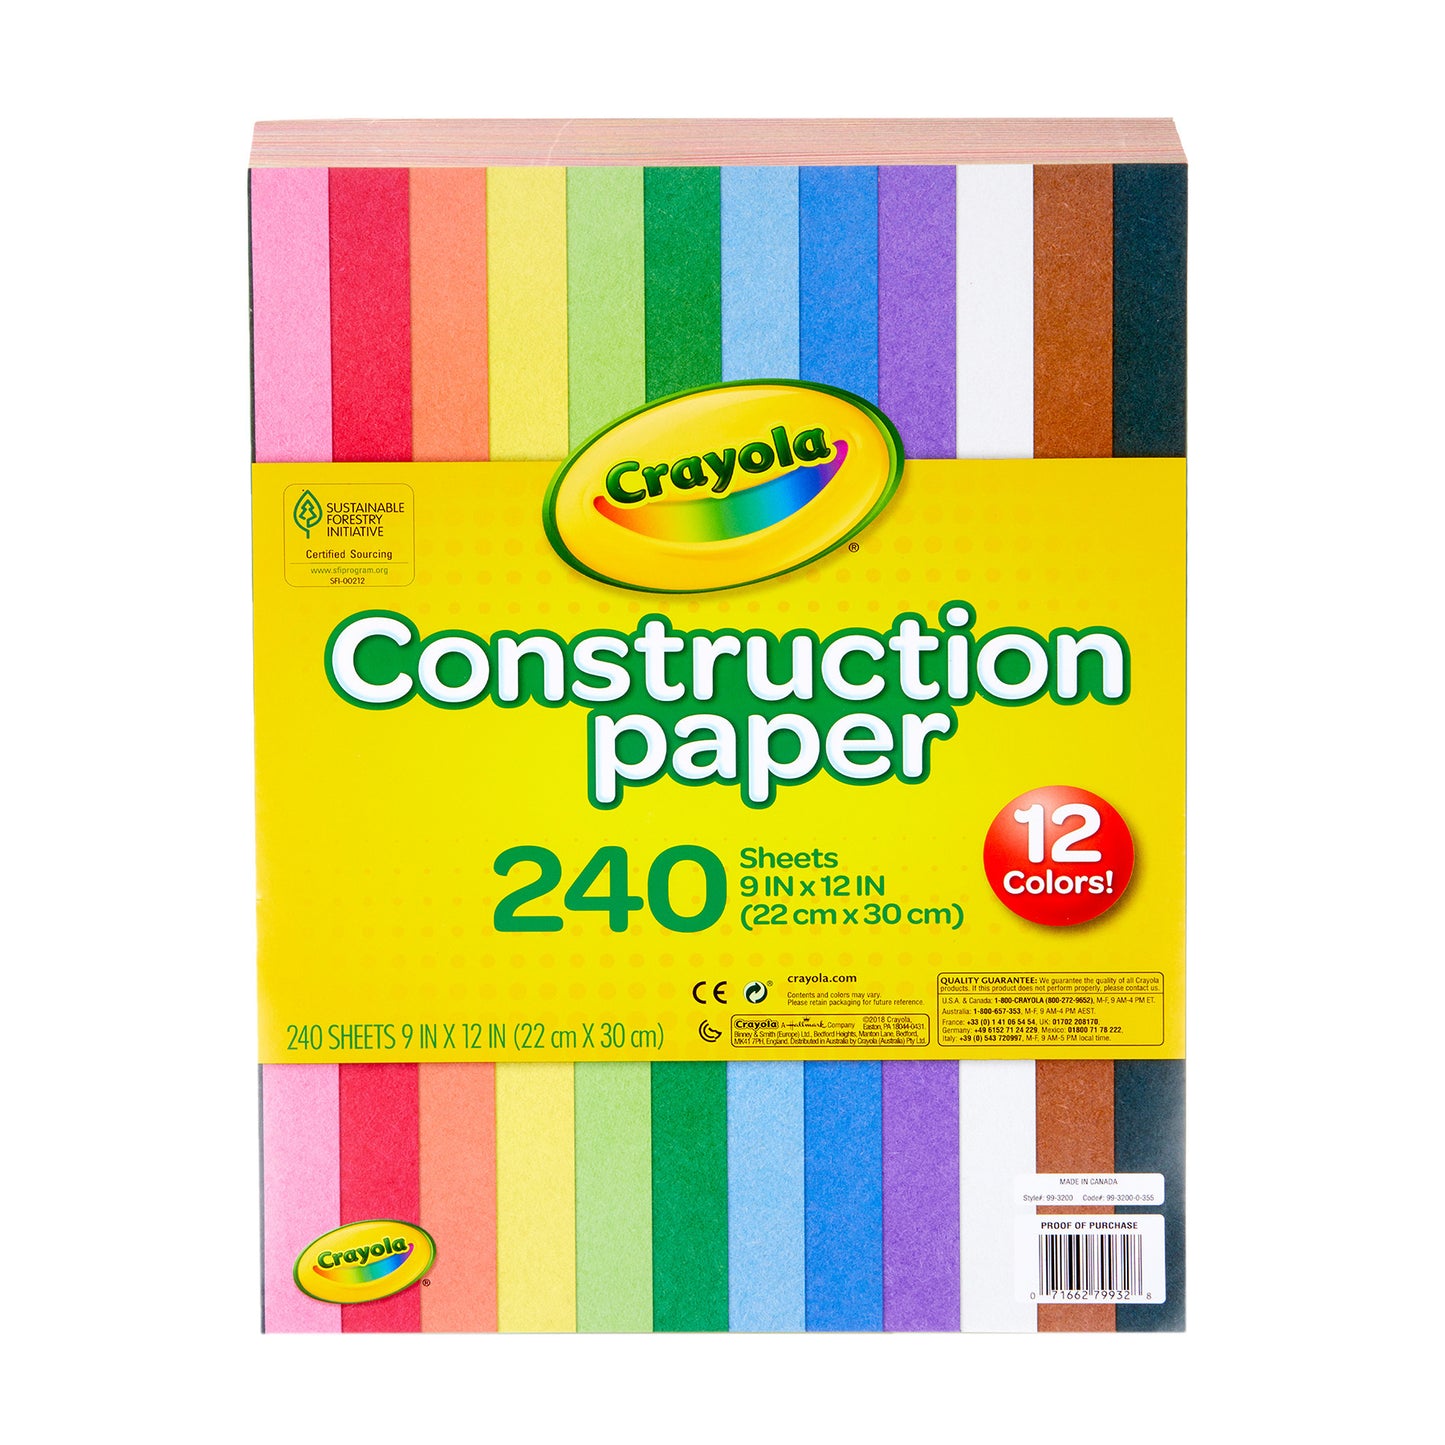 Construction Paper, 240 Sheets Per Pack, 3 Packs